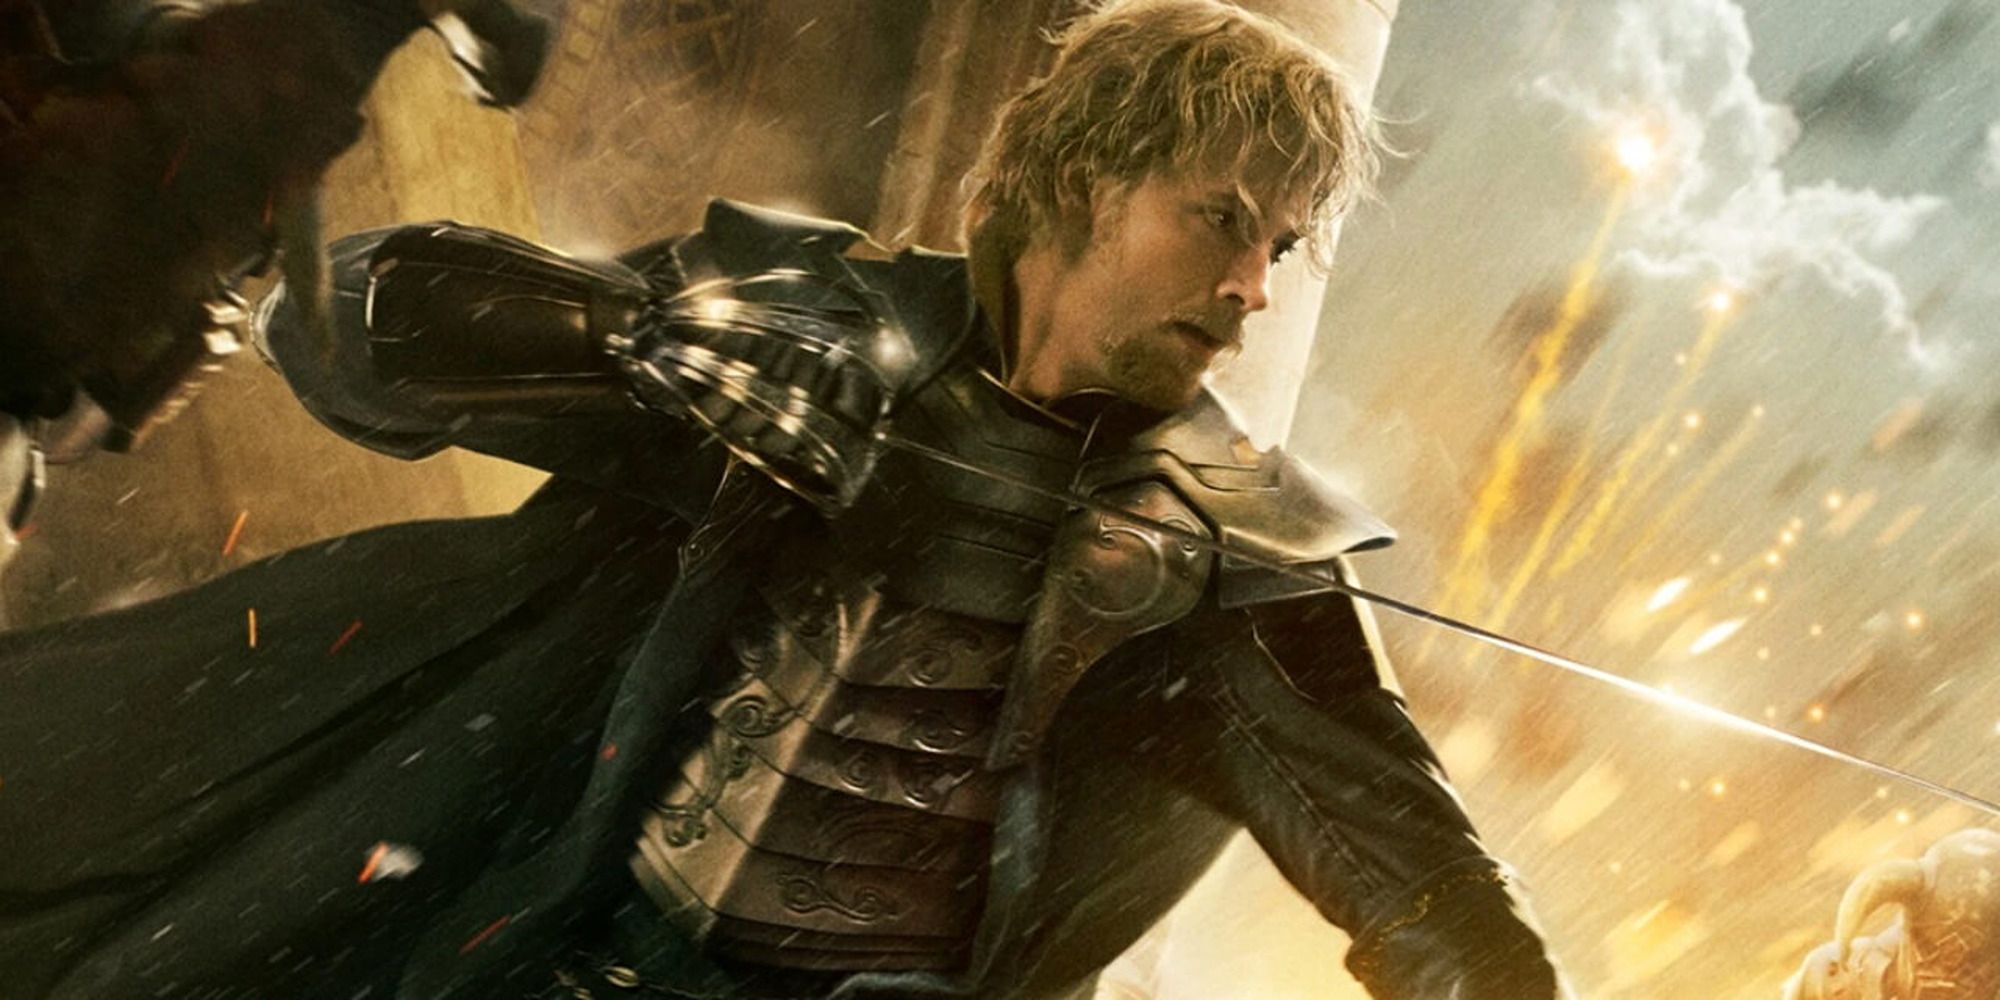 Zachary Levi in 'Thor: The Dark World', wielding a sword in front of an explosion